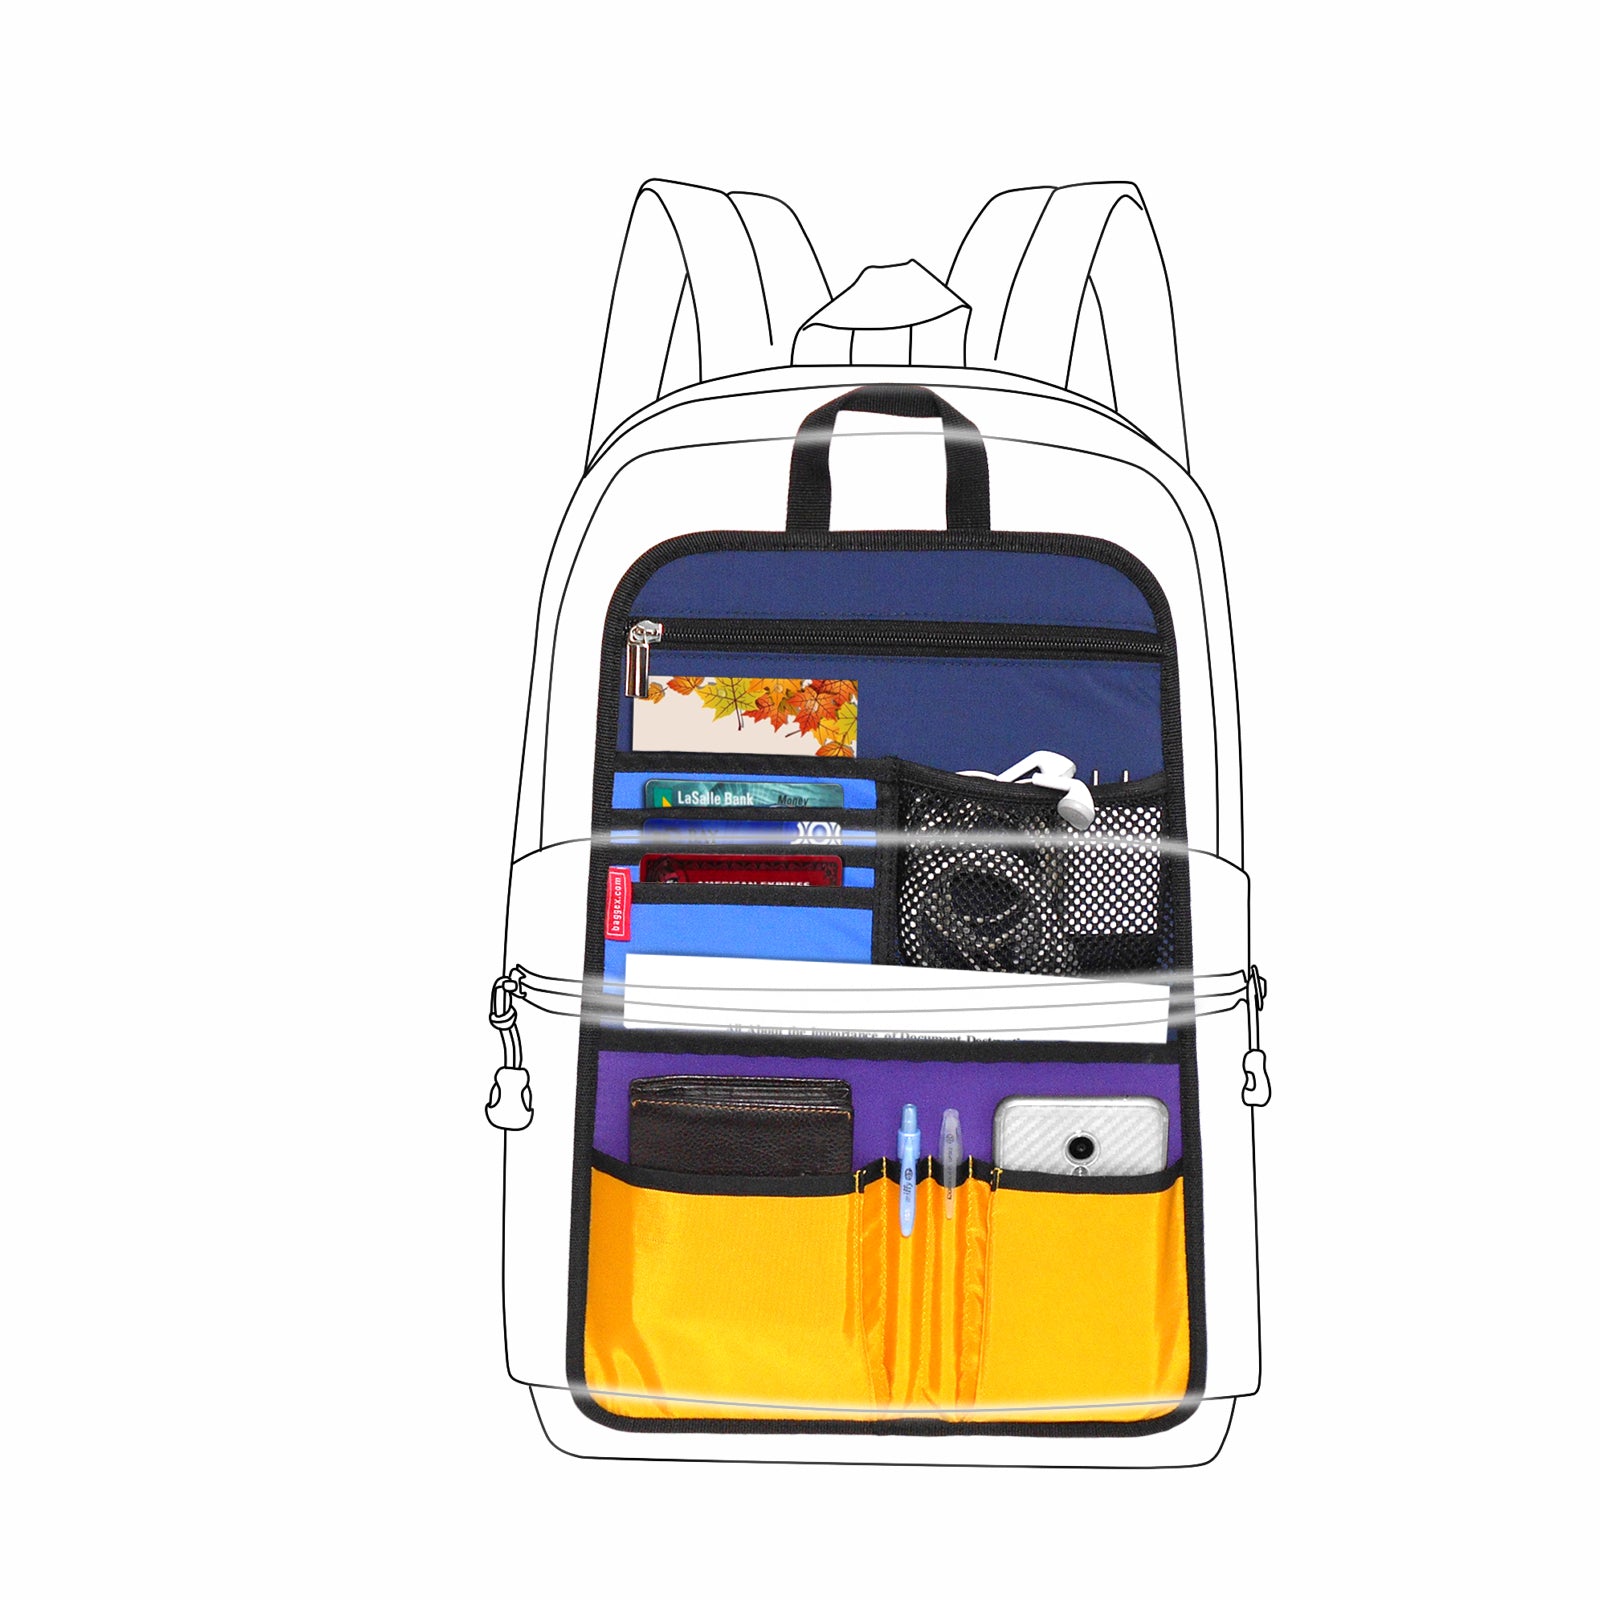 Backpack Insert Organizer – Baggex Store